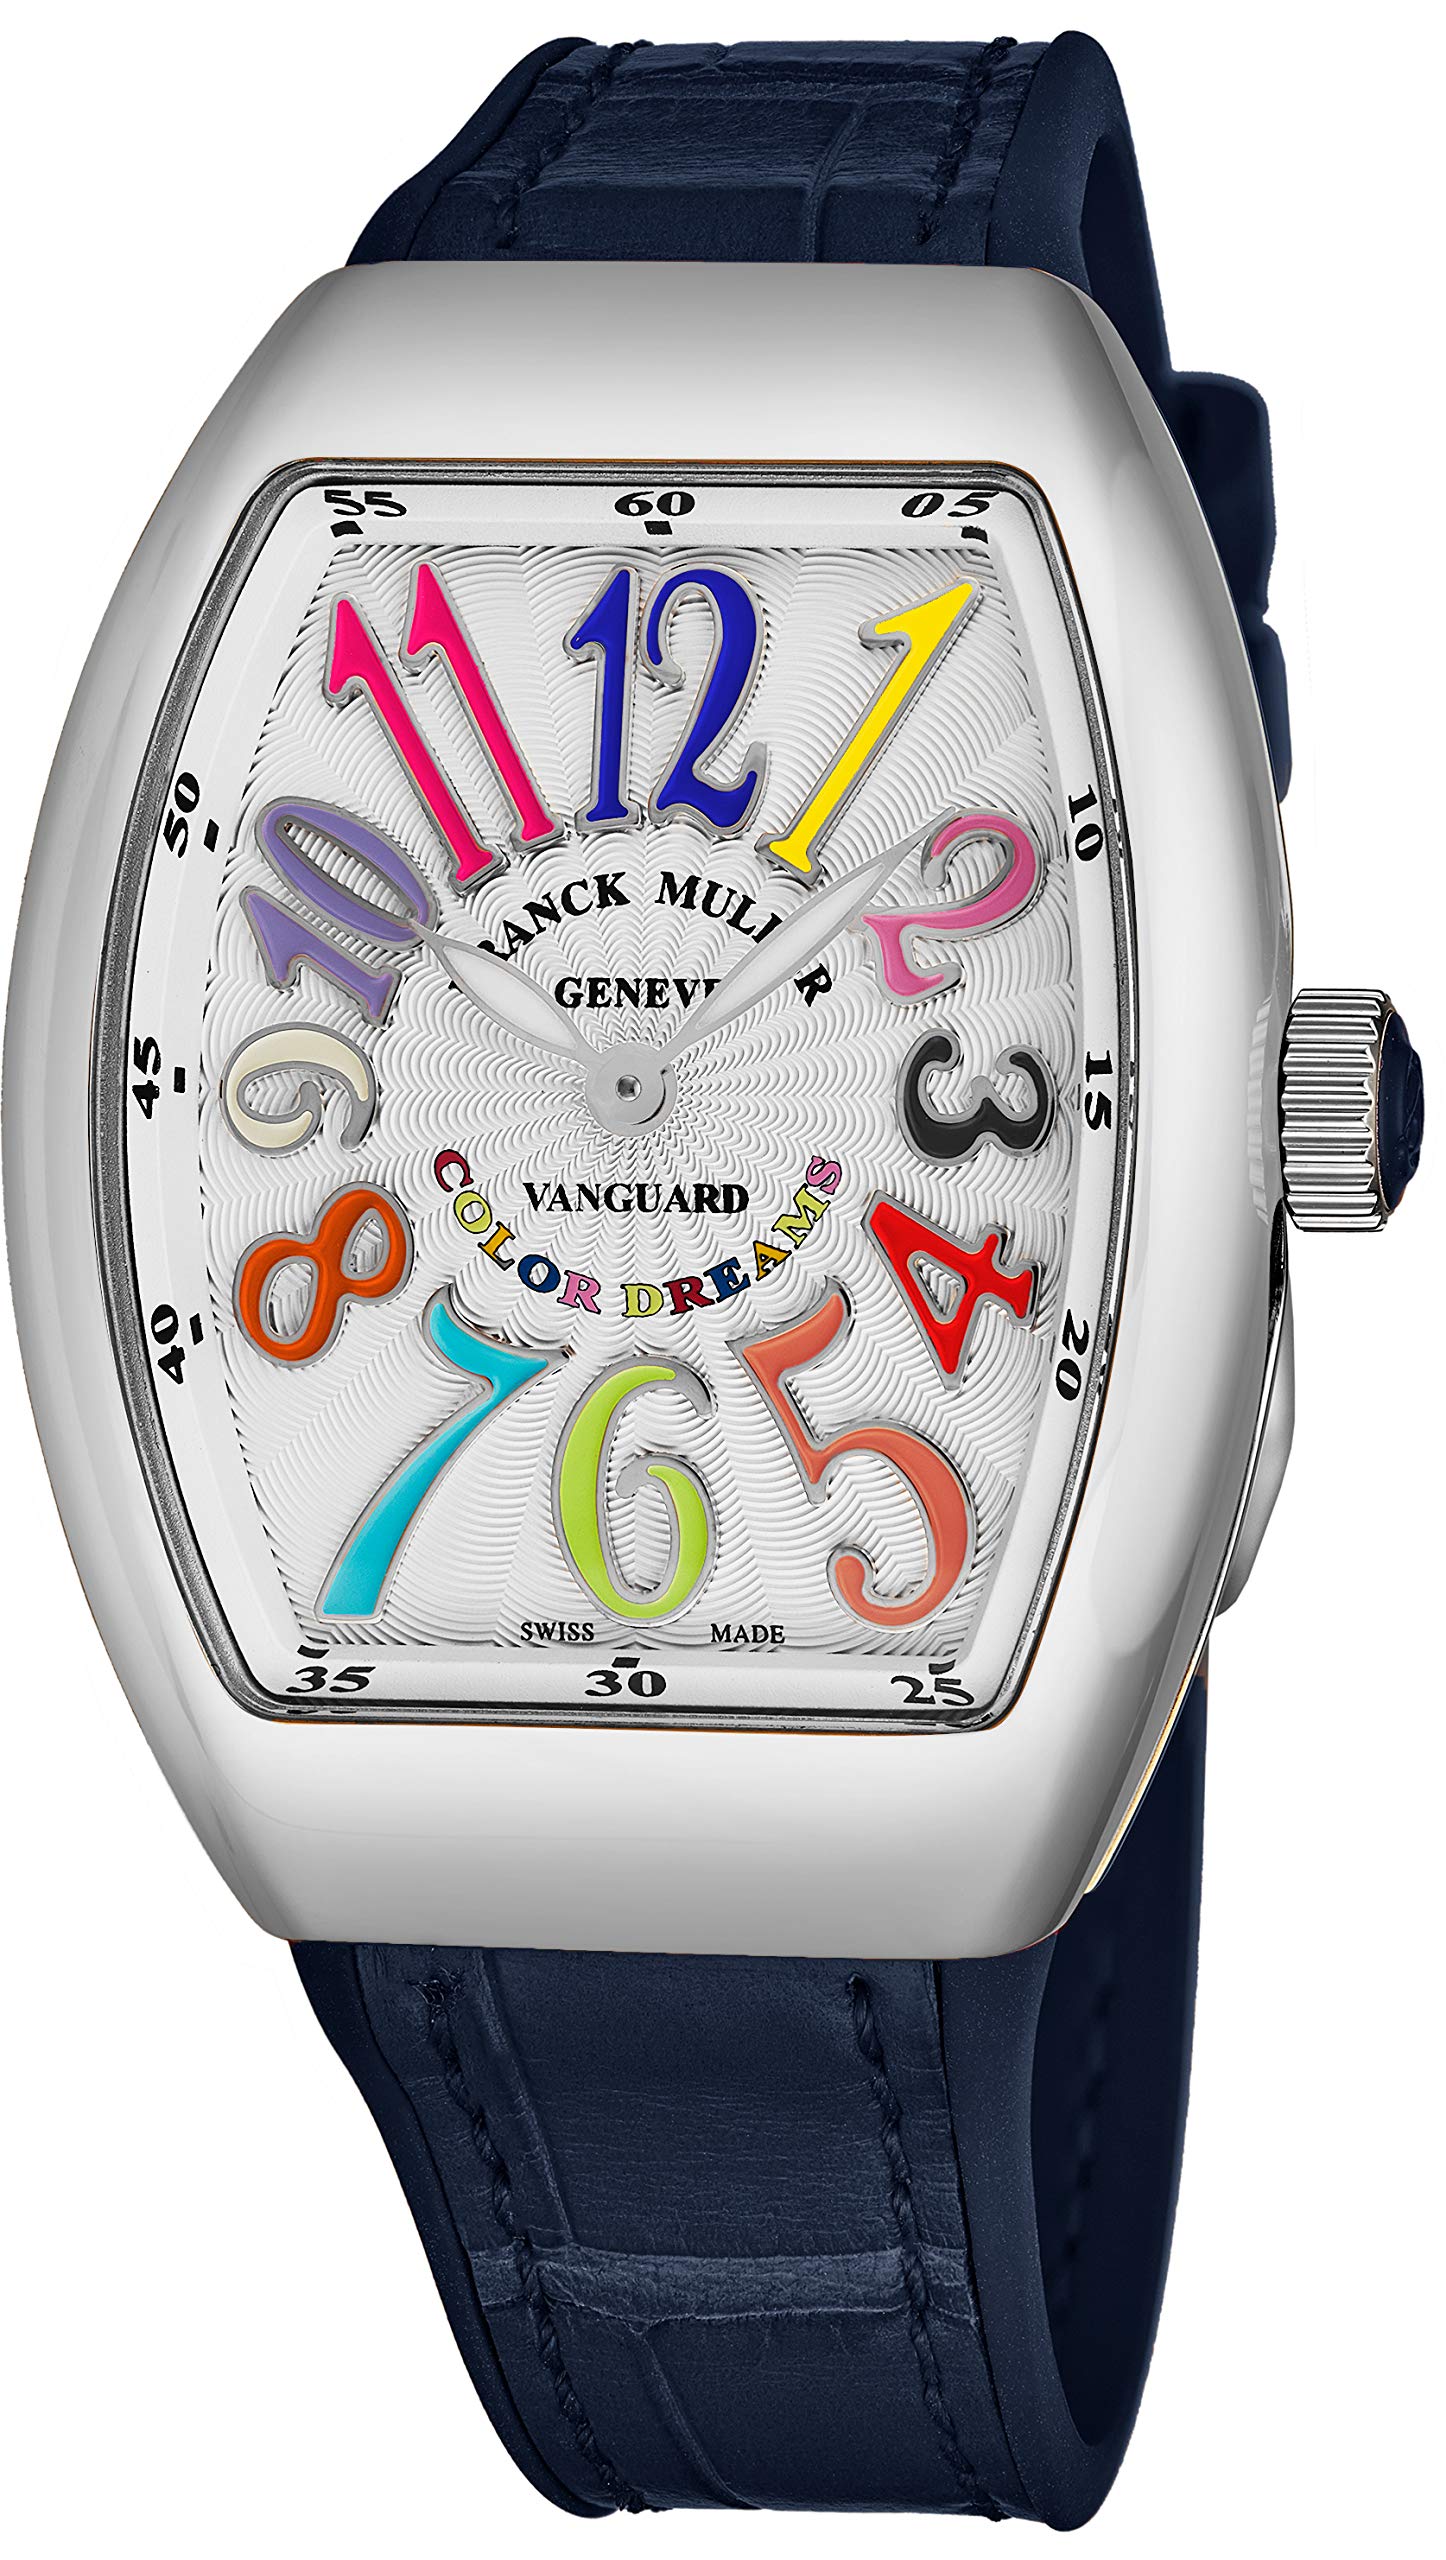 Franck Muller Vanguard Color Dreams Womens Swiss Quartz Watch - Tonneau Silver Face with Luminous Hands and Sapphire Crystal - Blue Leather/Rubber Strap Ladies Watch V 32 SC at FO COL DRM